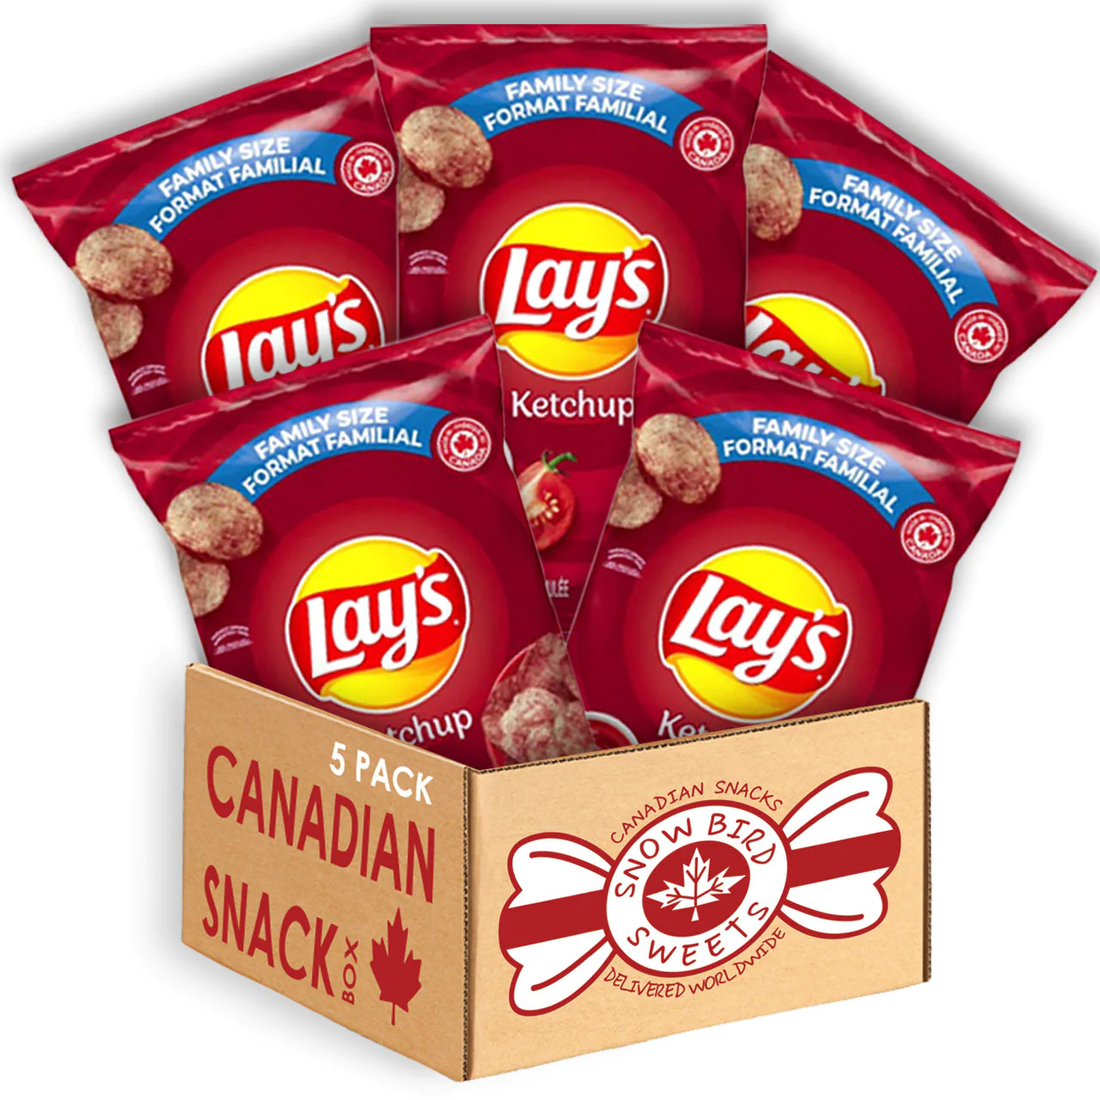 Canadian Lays Ketchup Chips: The Most Delicious Ketchup Snack